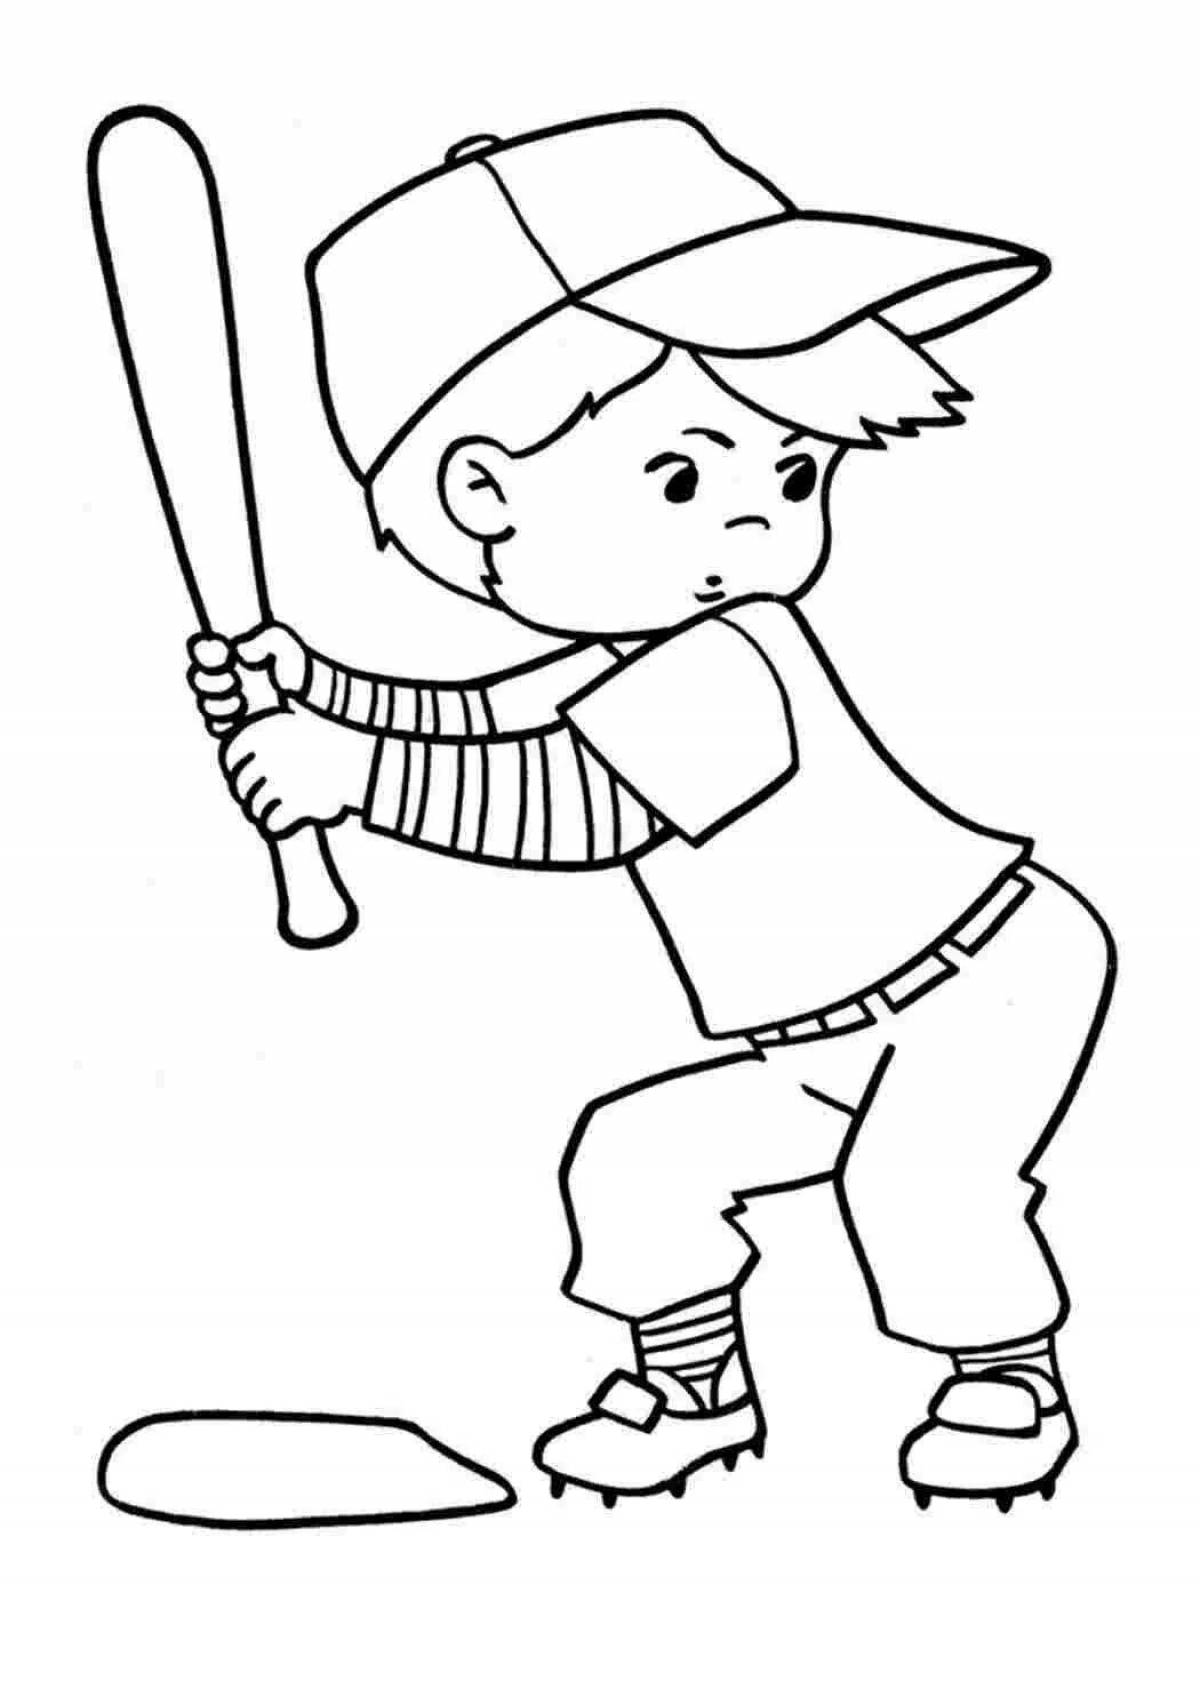 Colorful sports coloring book for preschoolers